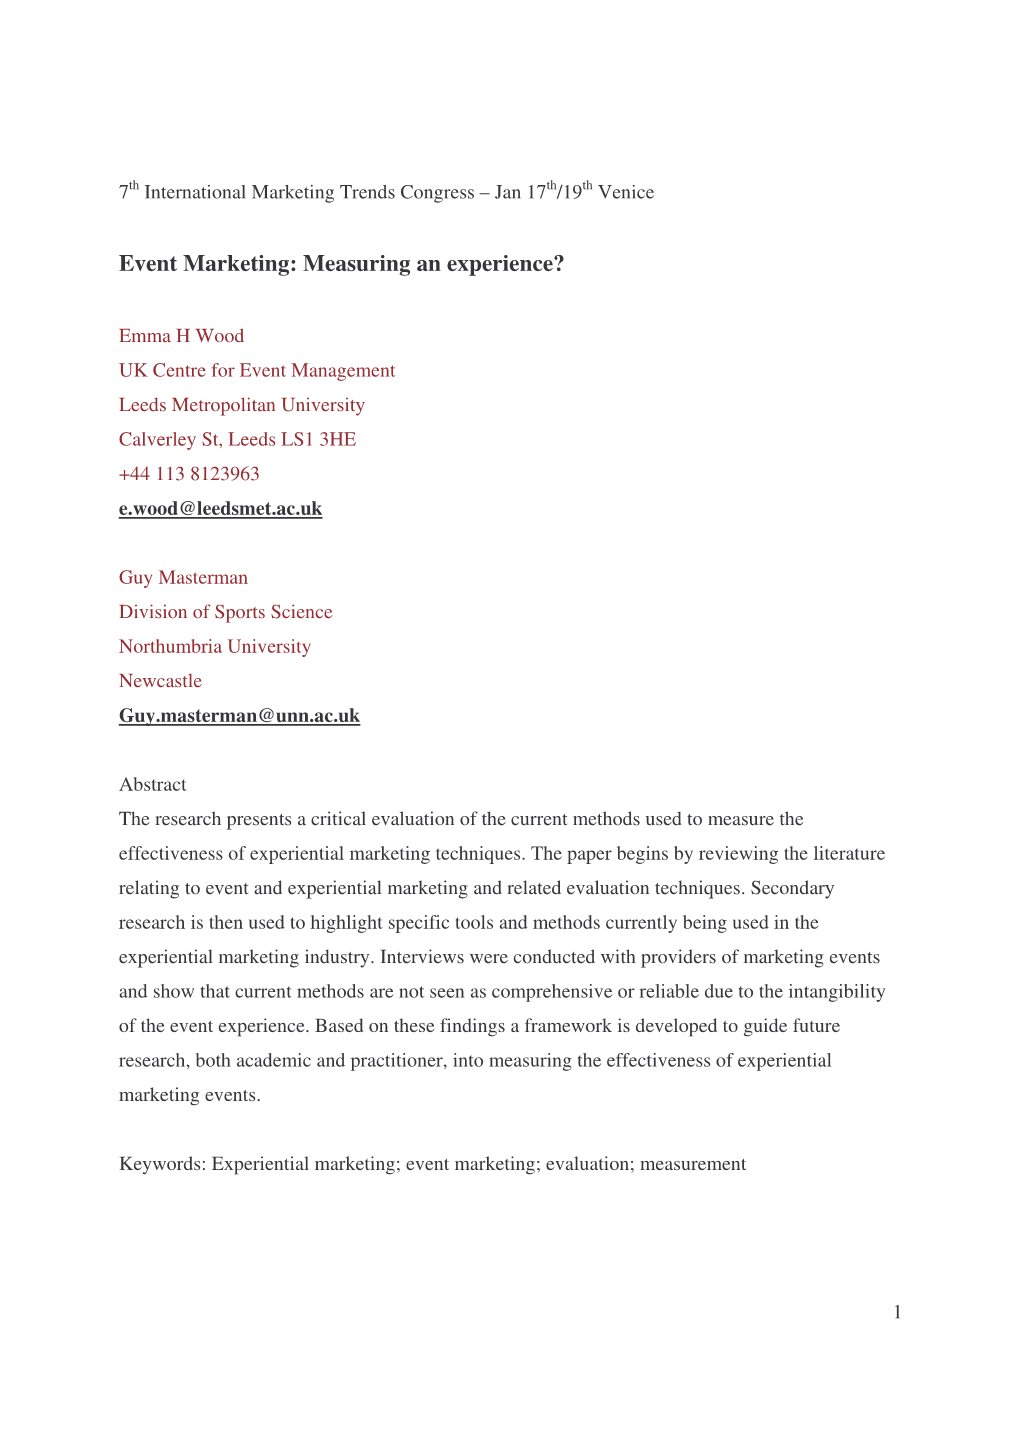 Event Marketing: Measuring an Experience?